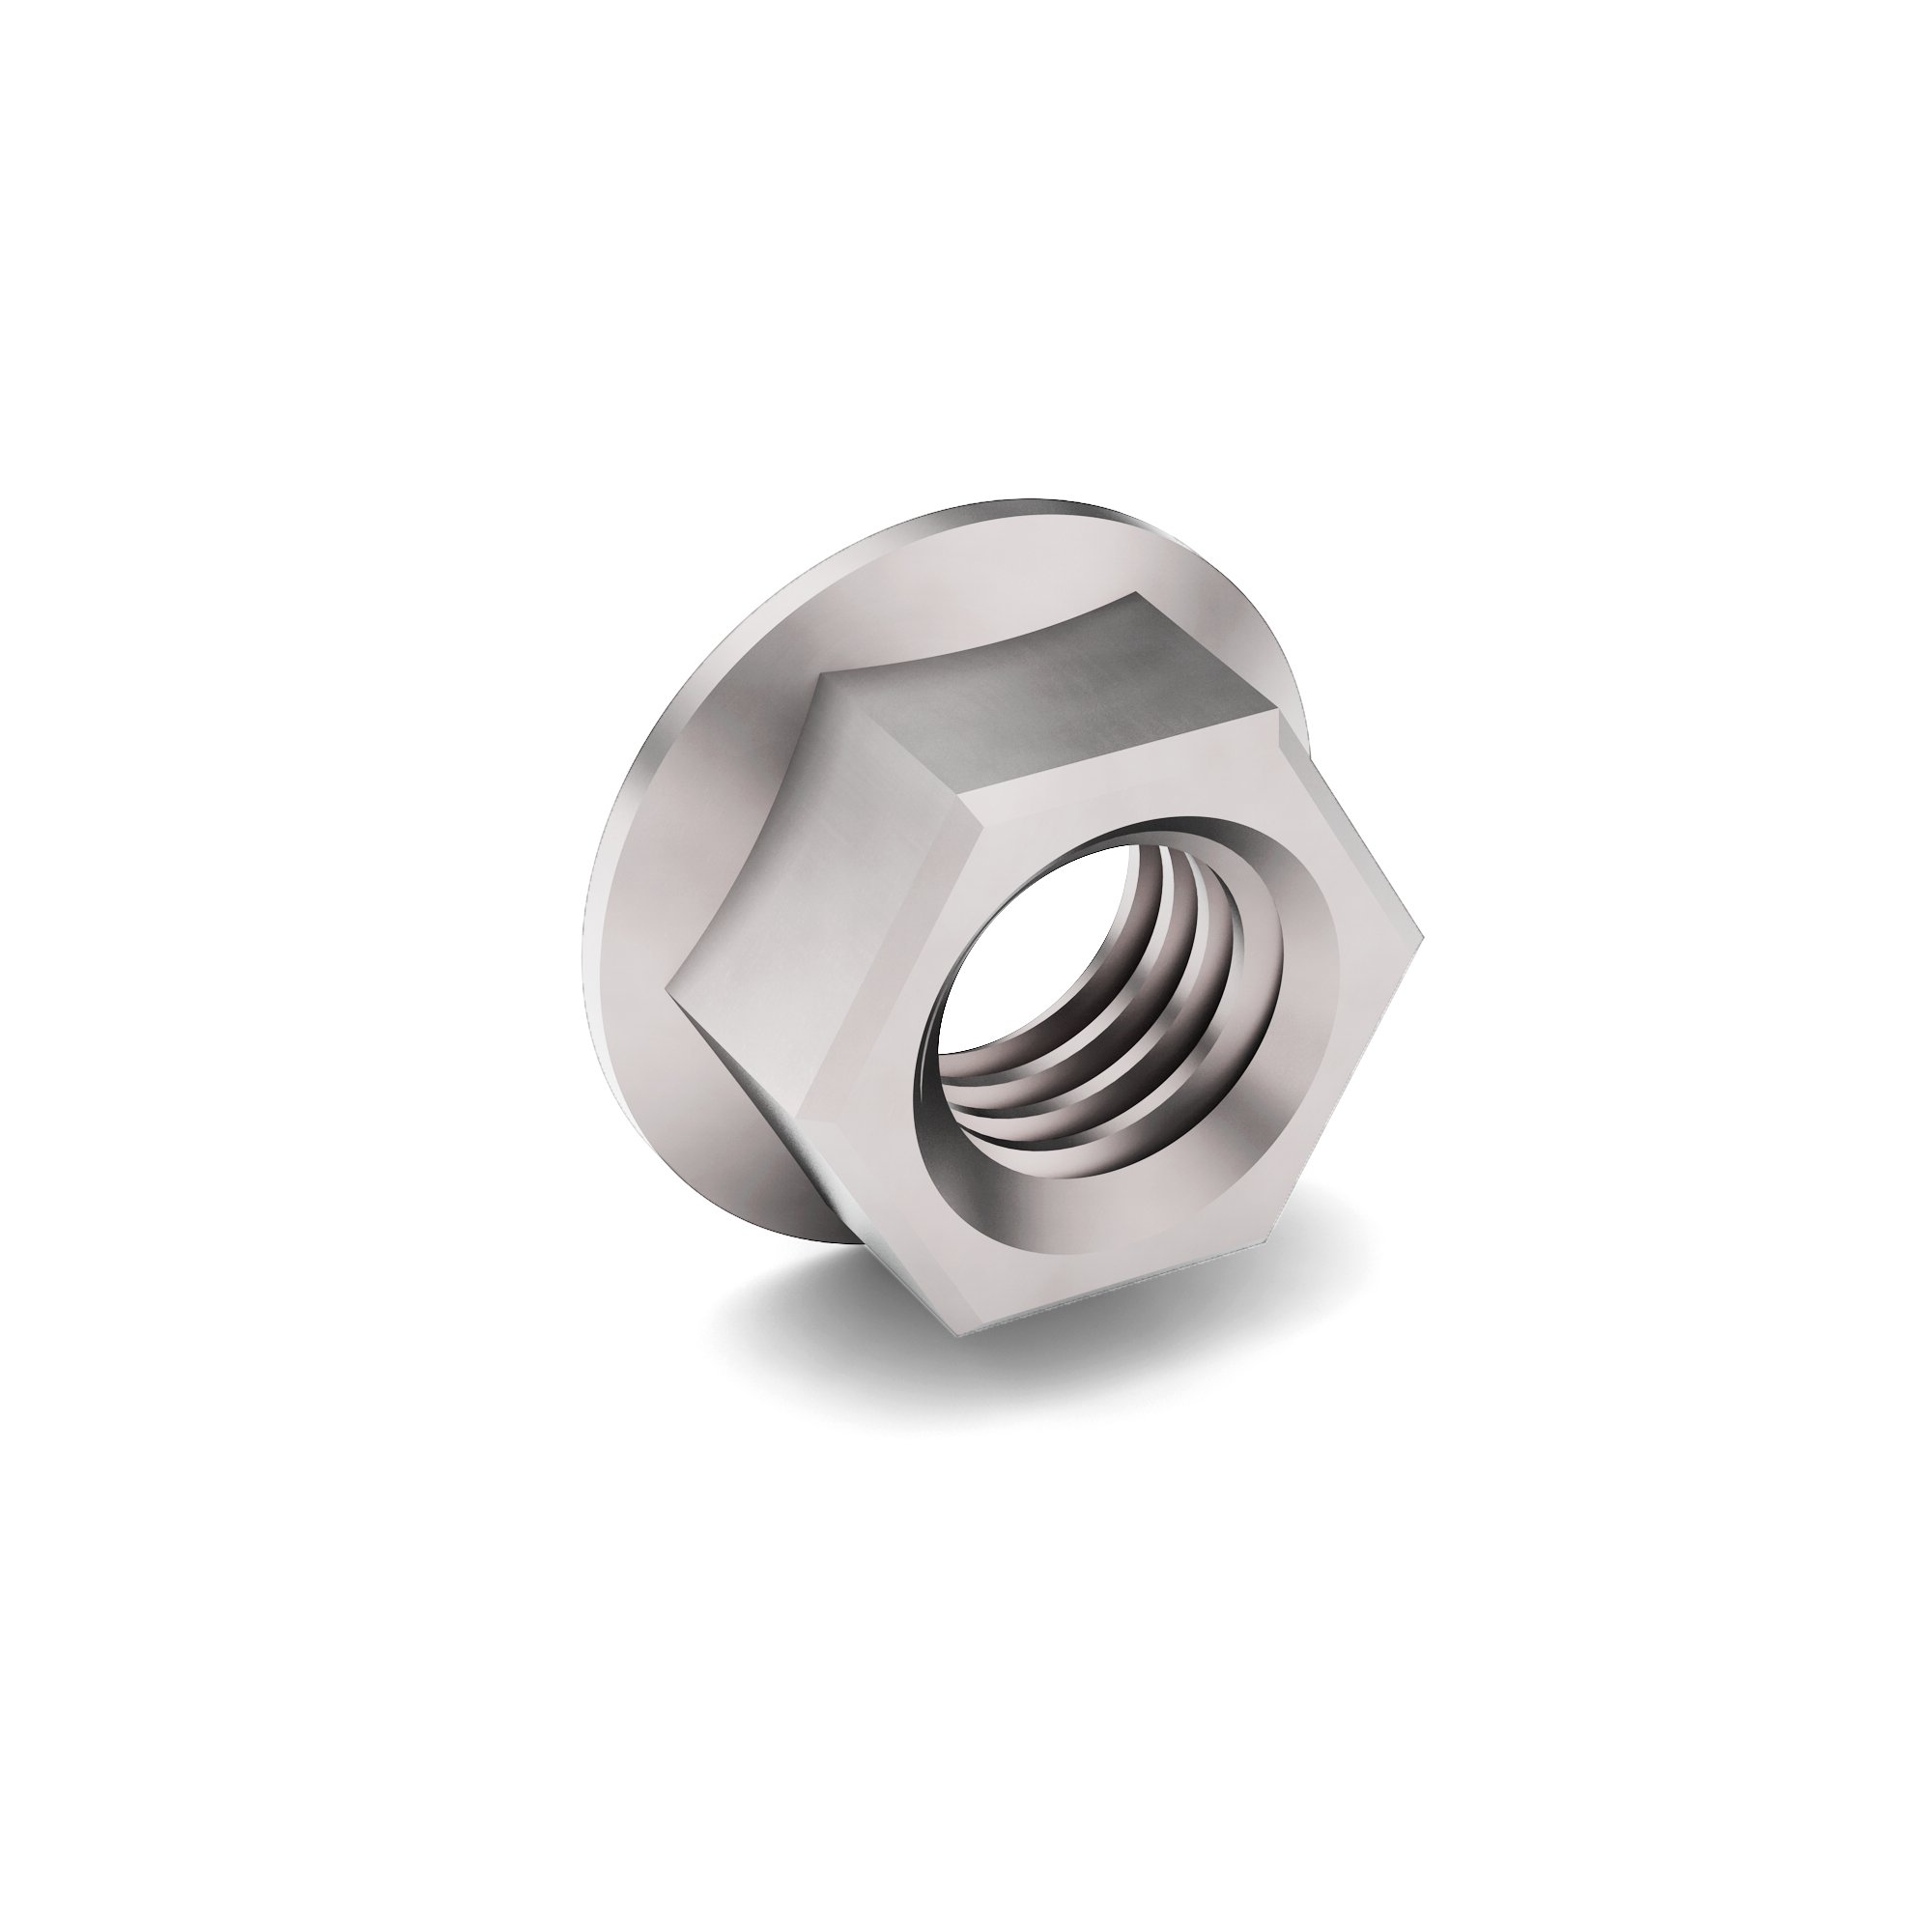 M5-0.8 ISO 8 Hex Flange Nut DIN 6923 Zinc Clear